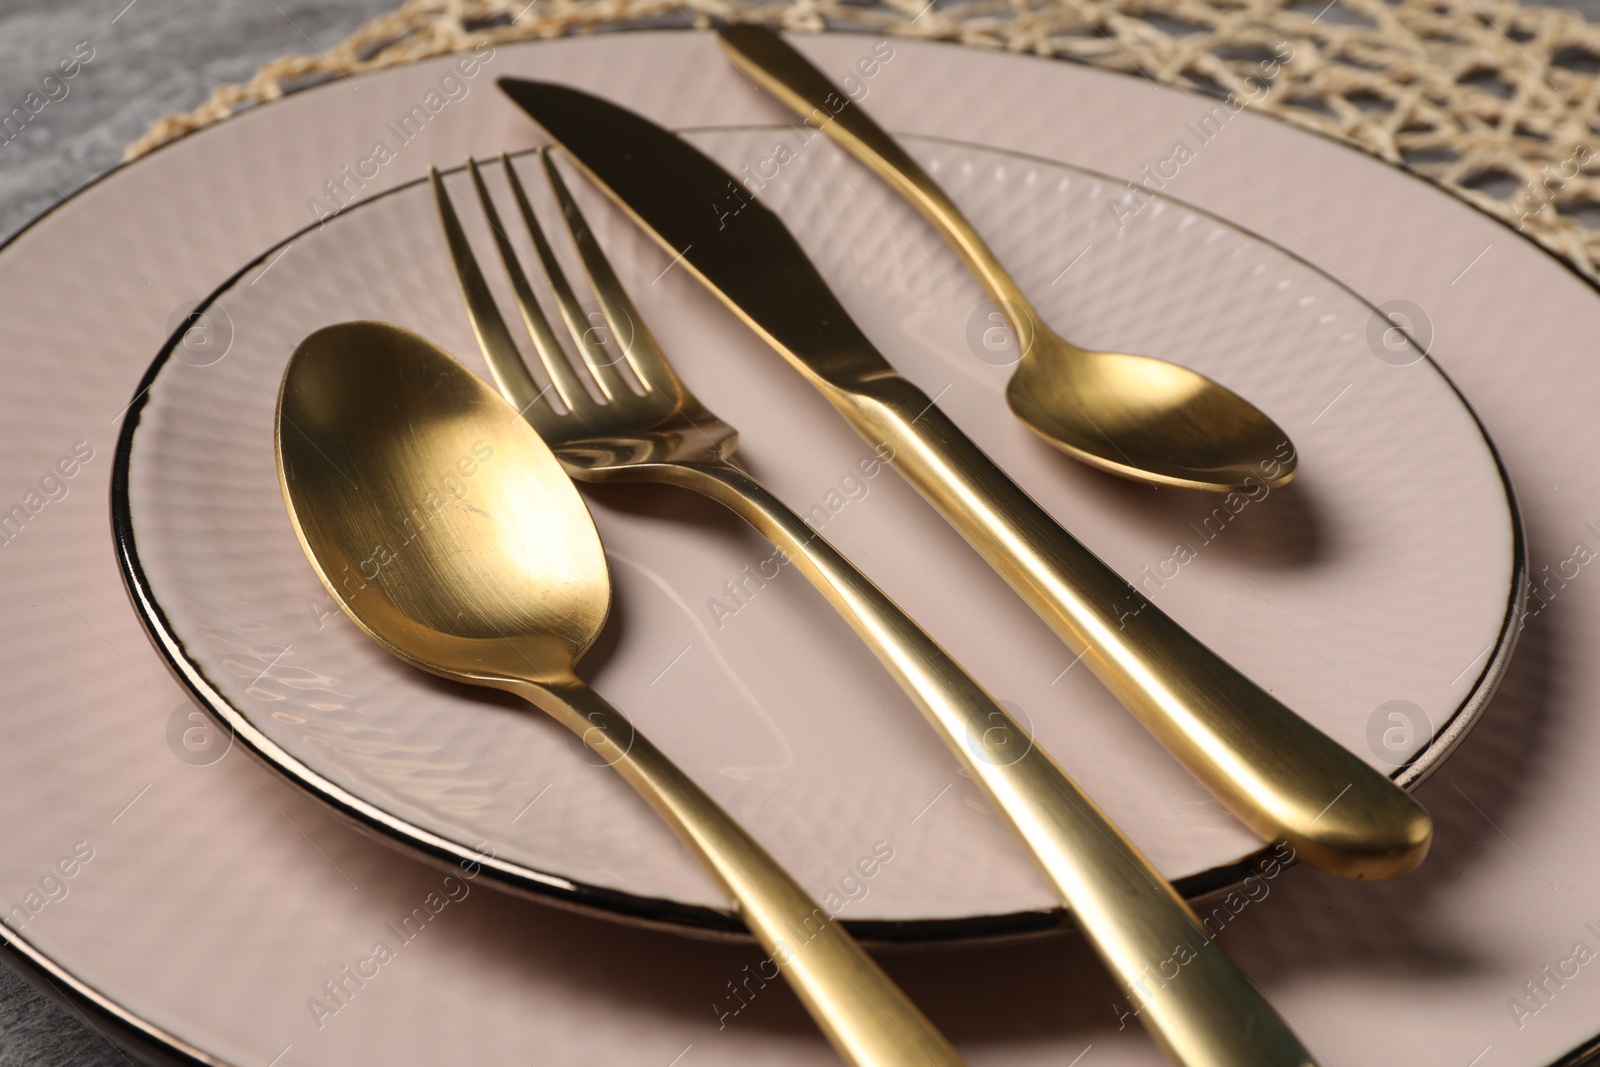 Photo of Stylish table setting with cutlery on grey background, closeup view